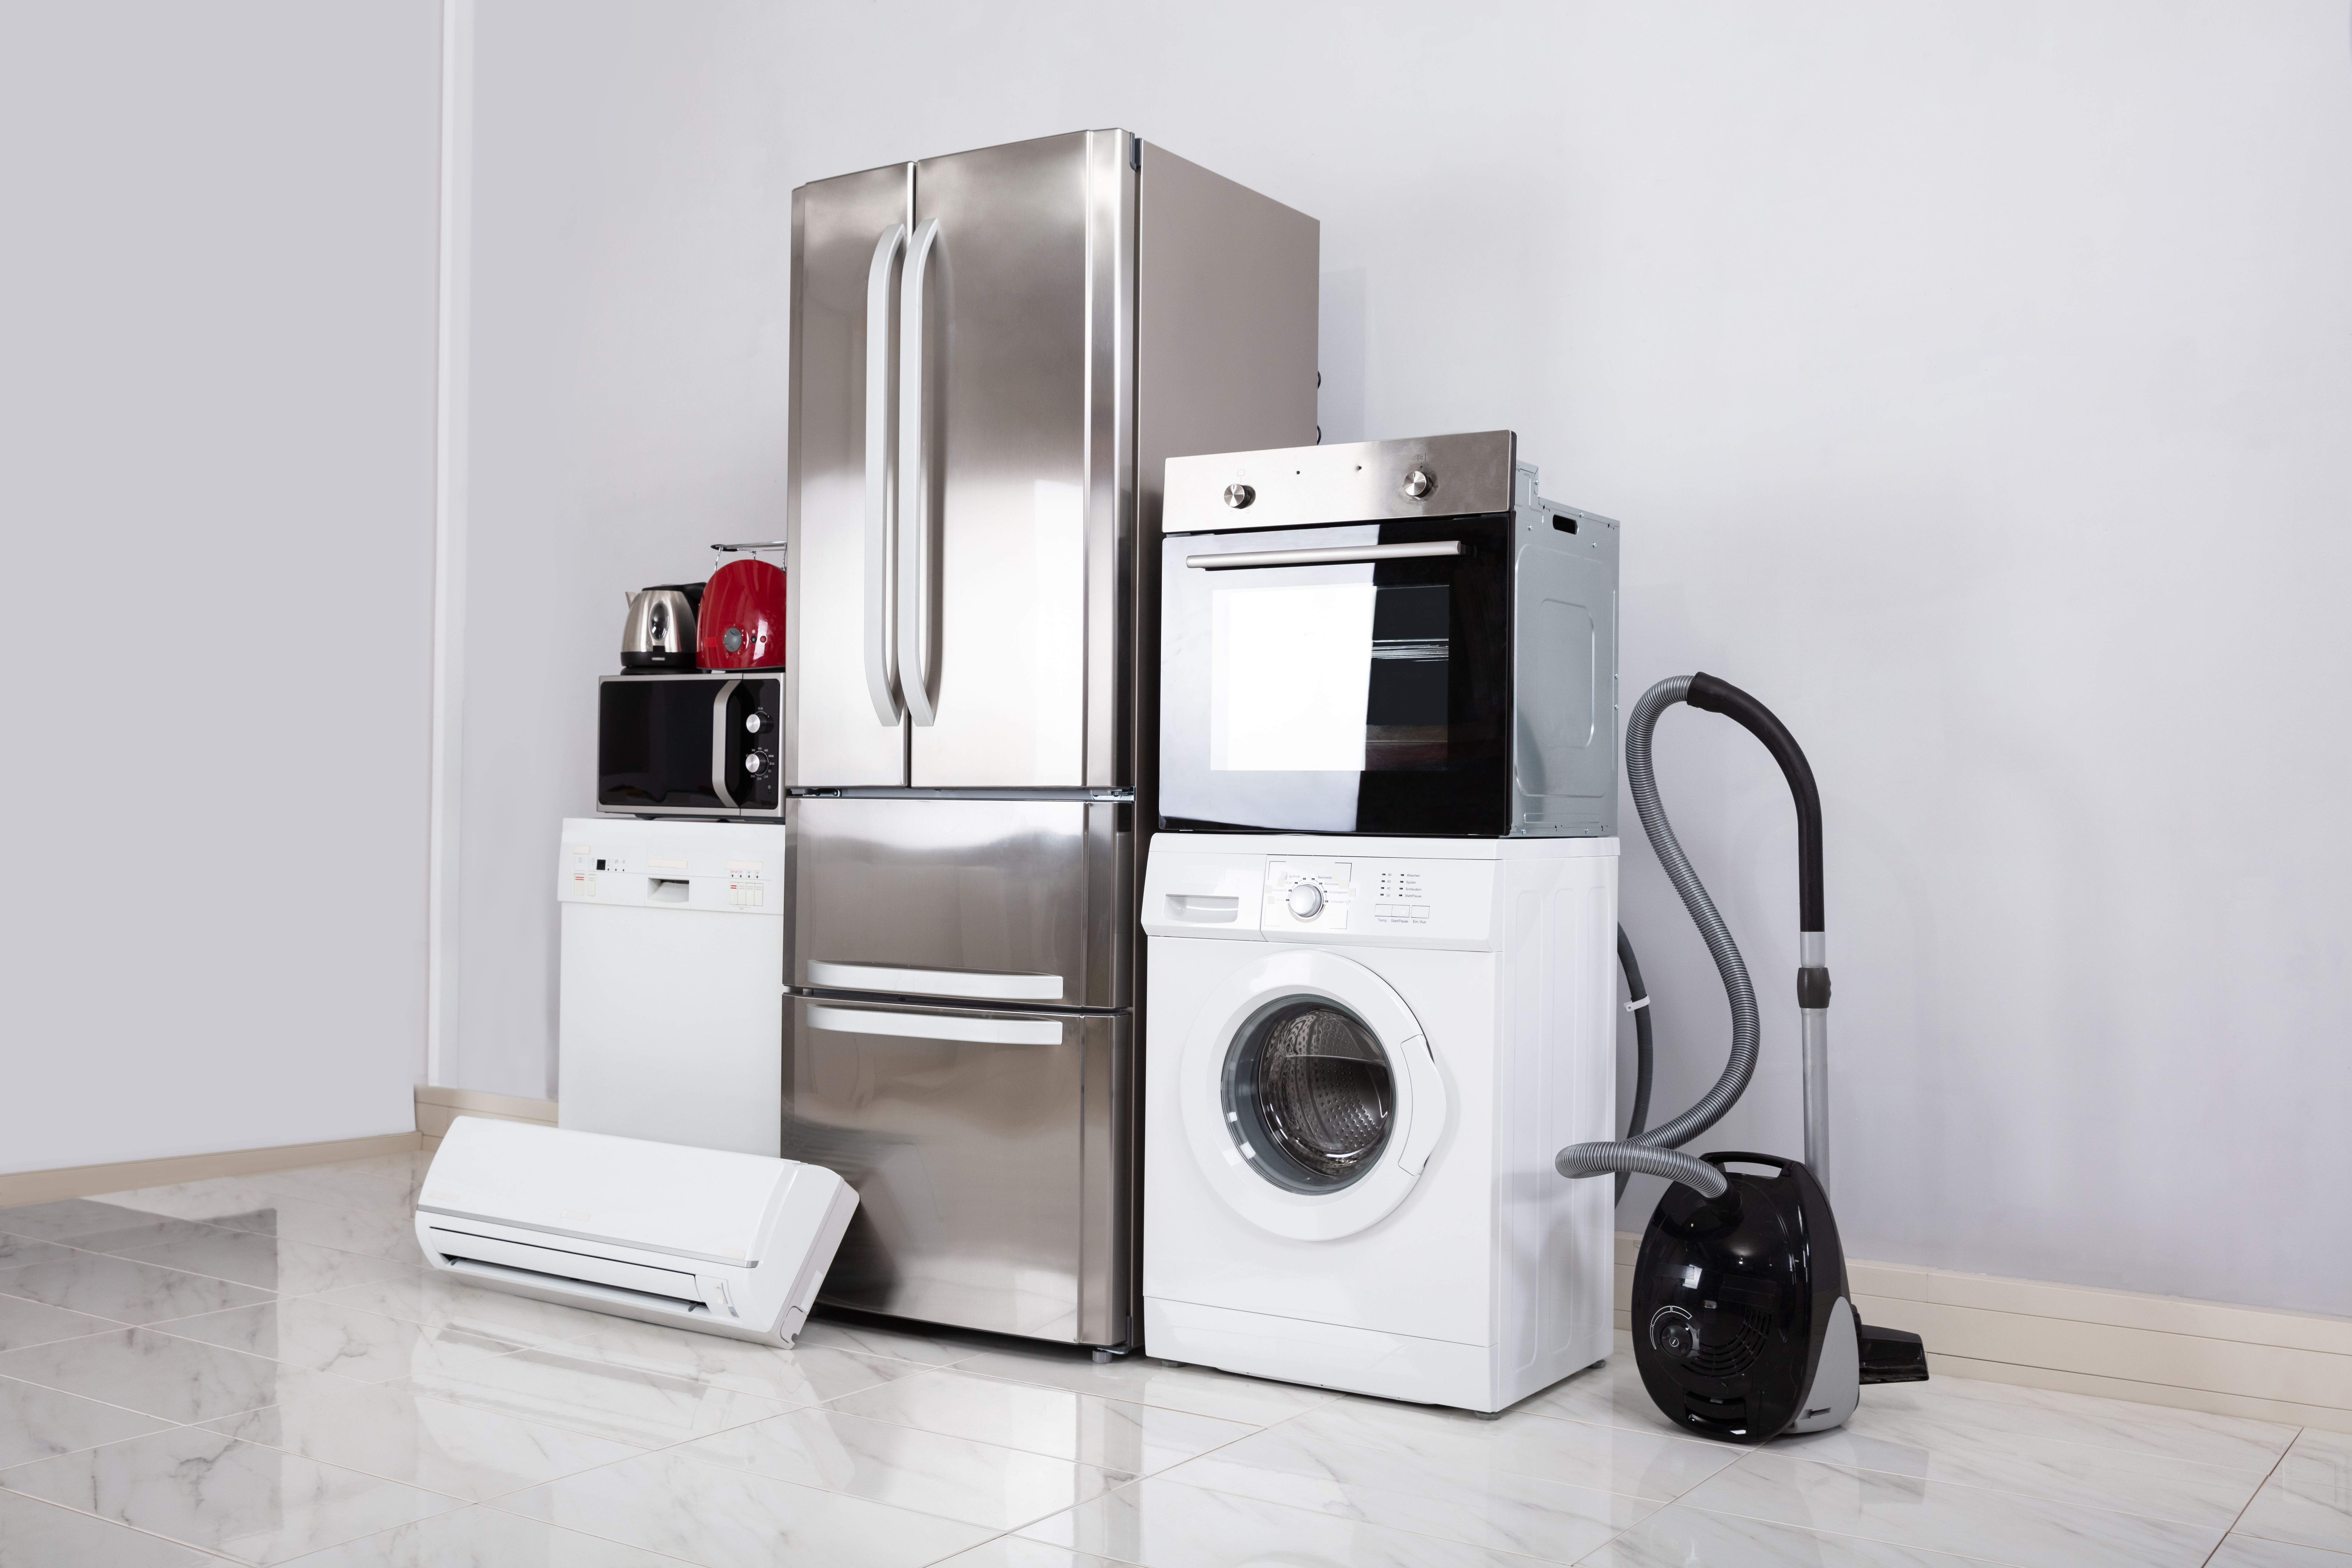 Several consumer products created with precision machined components. Machines on display together including refrigerator, washing machine, drying machine, and vacuum.